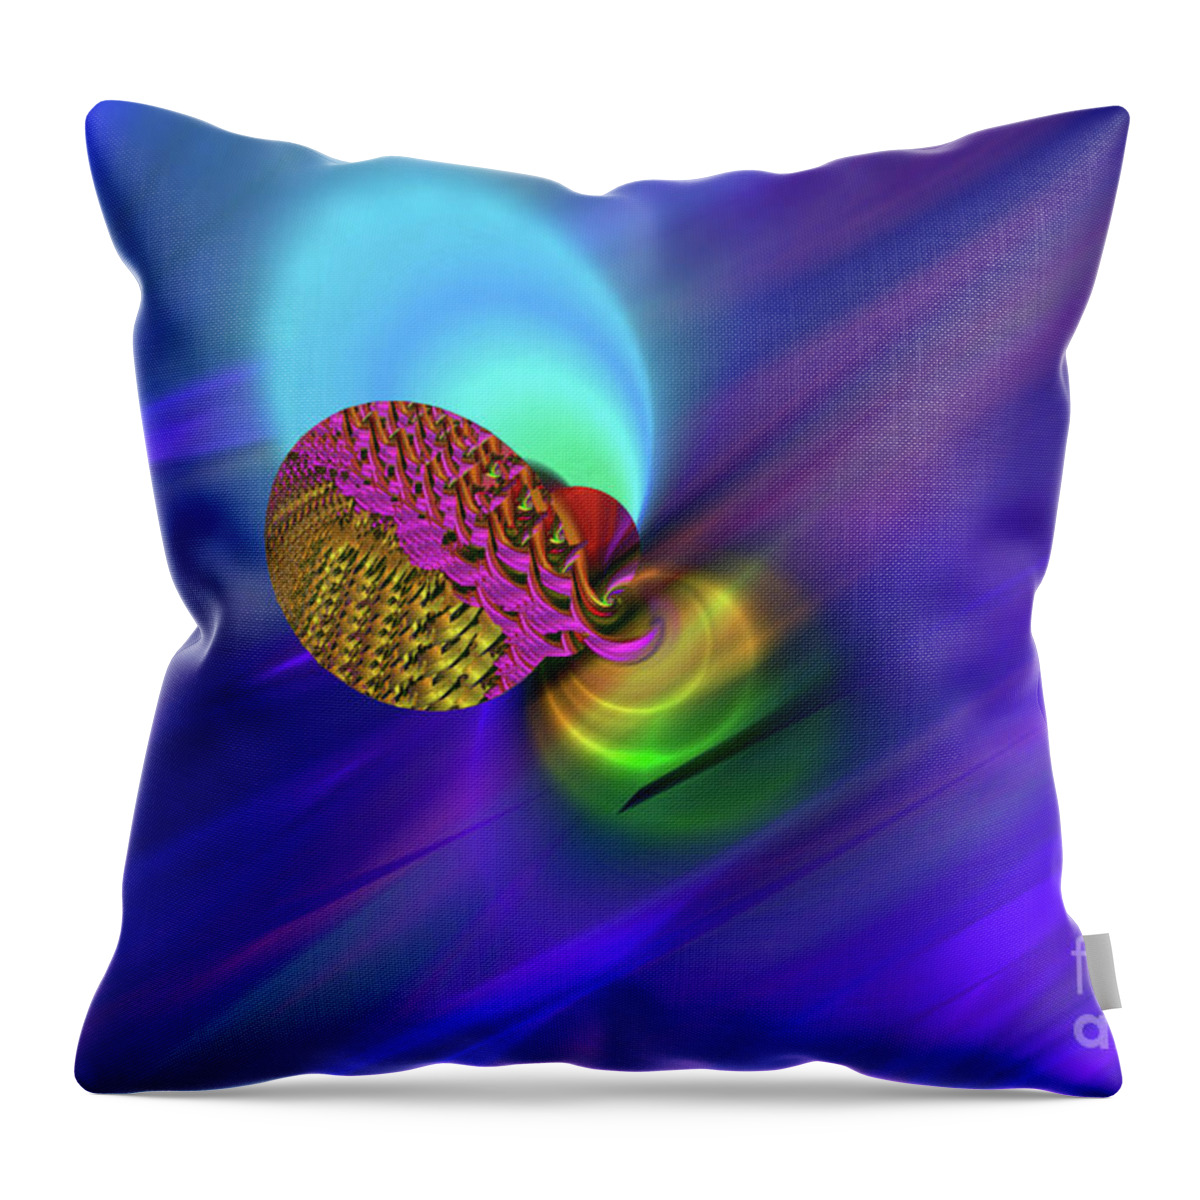 Abstract Throw Pillow featuring the photograph Beautiful New Life by Elaine Hunter